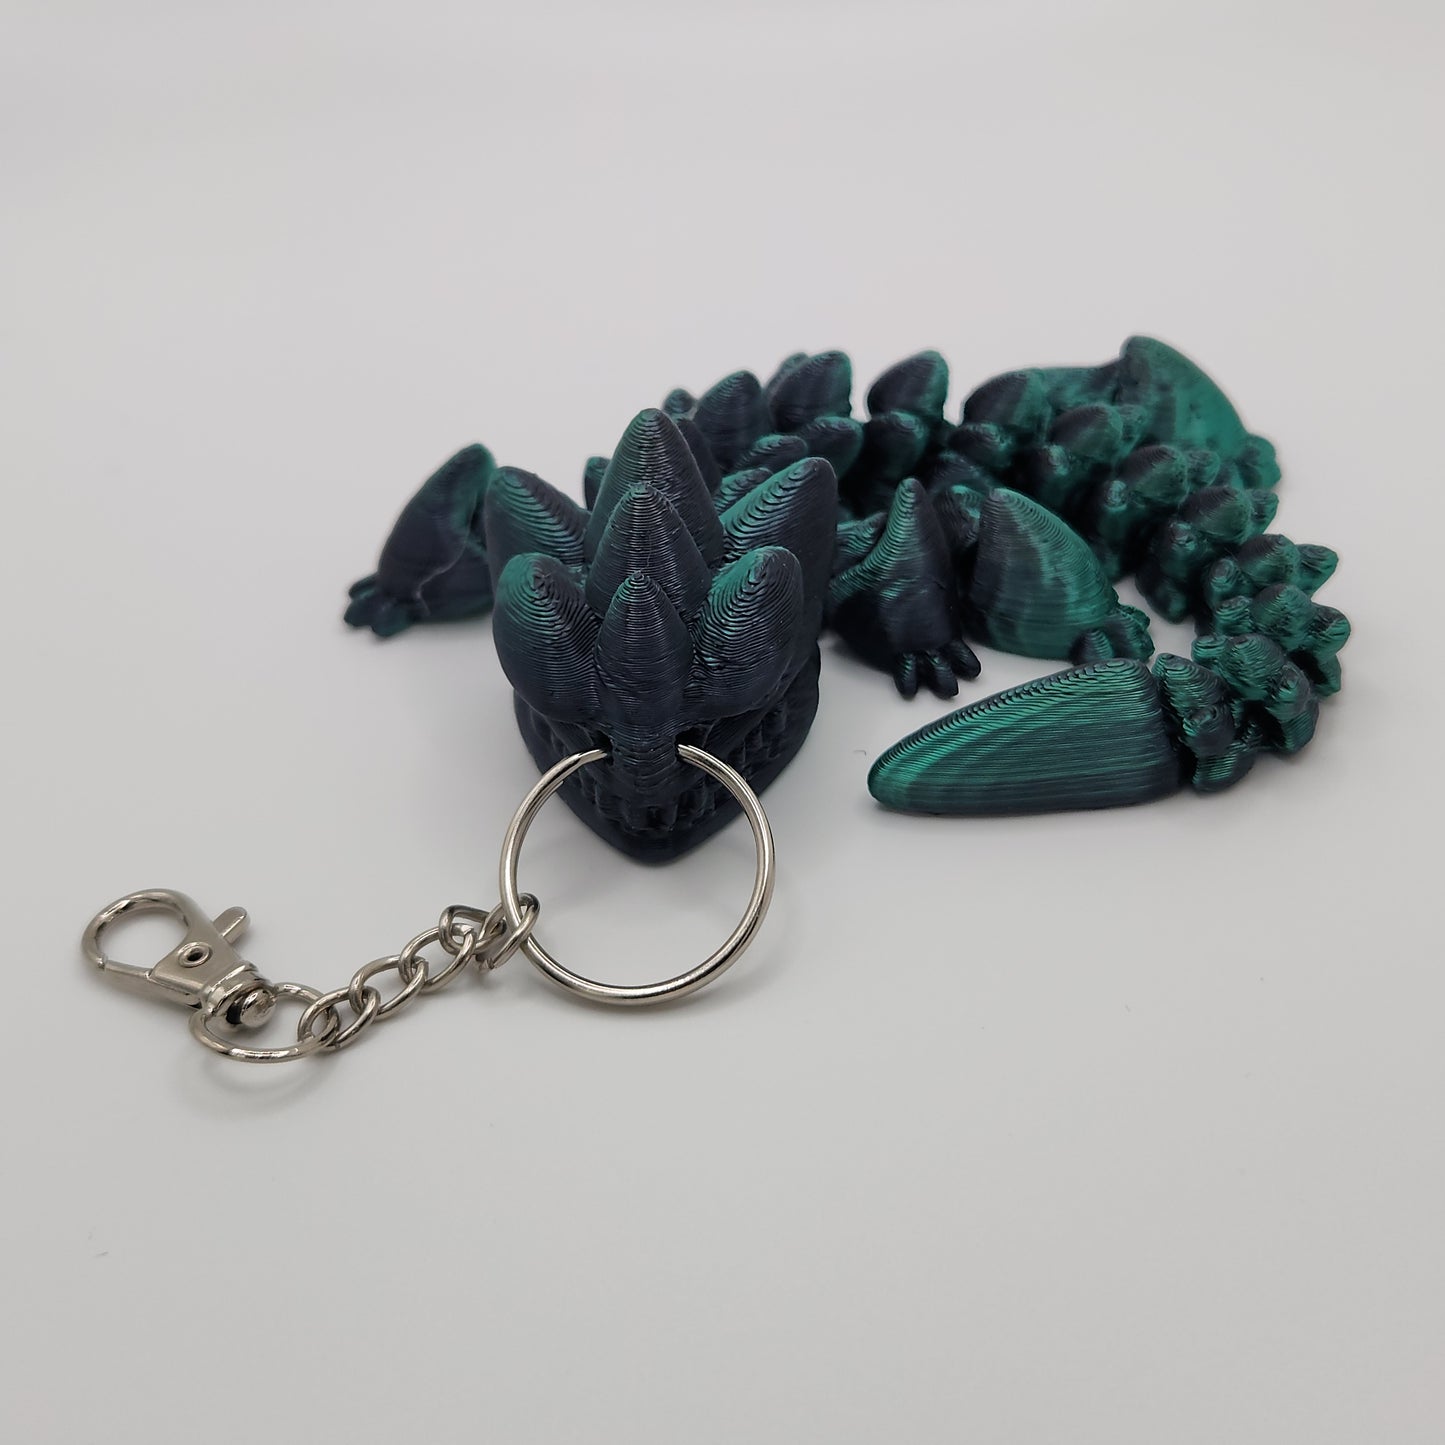 The articulated dragon keychain curled up on a white background, highlighting its black and teal scales and attached keyring.